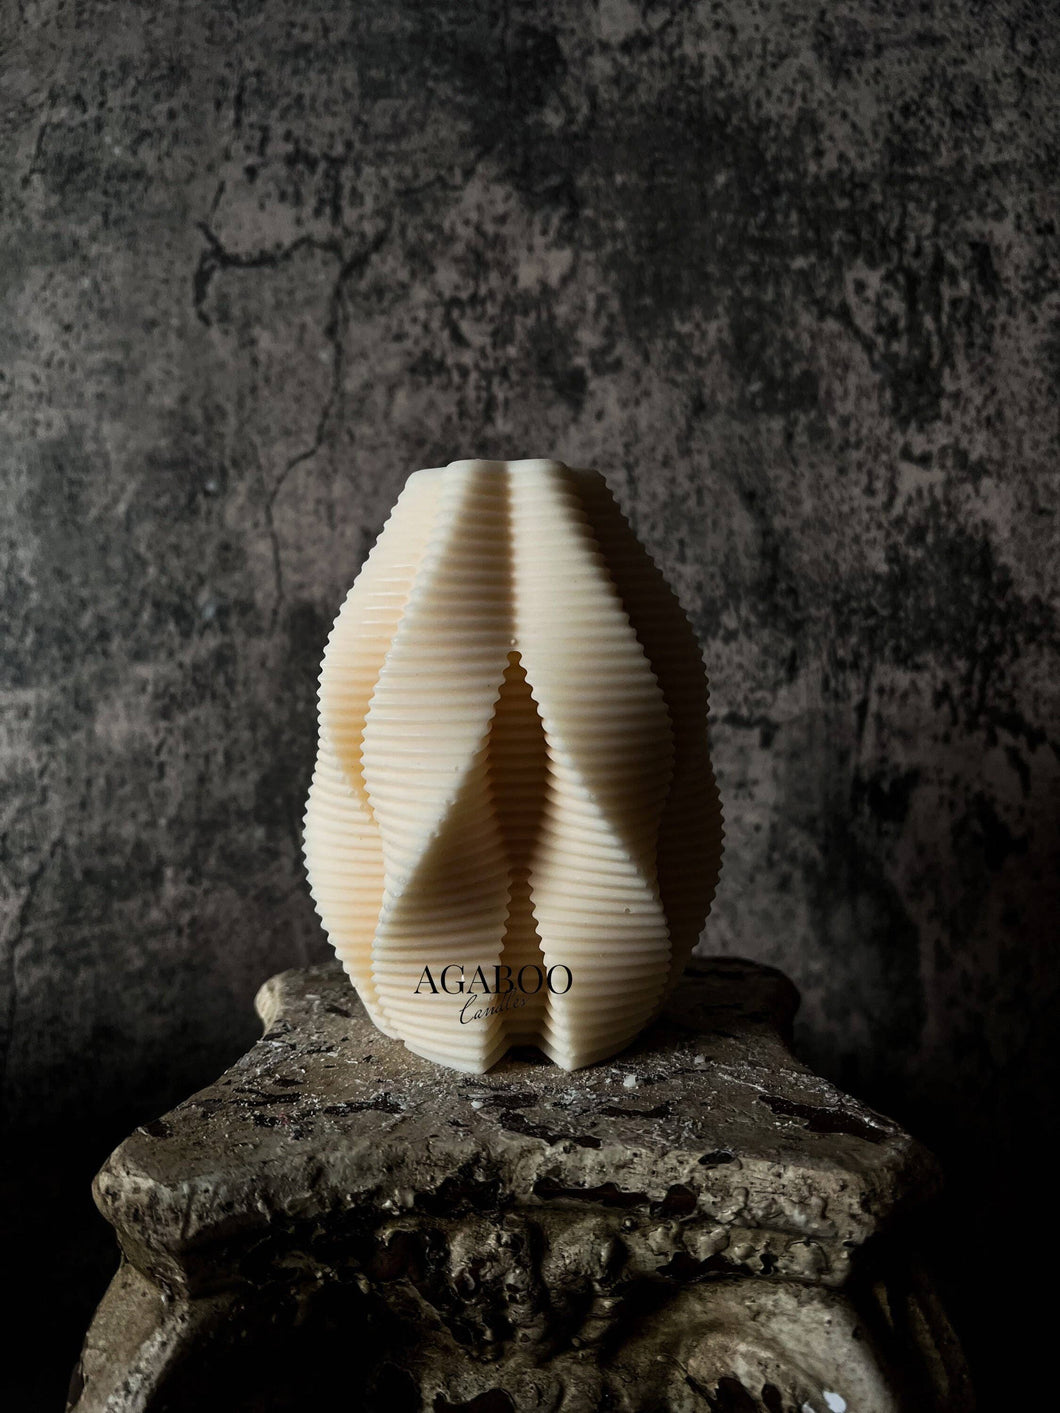 Agaboo Candle - Ribbed Aesthetic Swirl Candle - Shaped Candle: Unscented / Cream